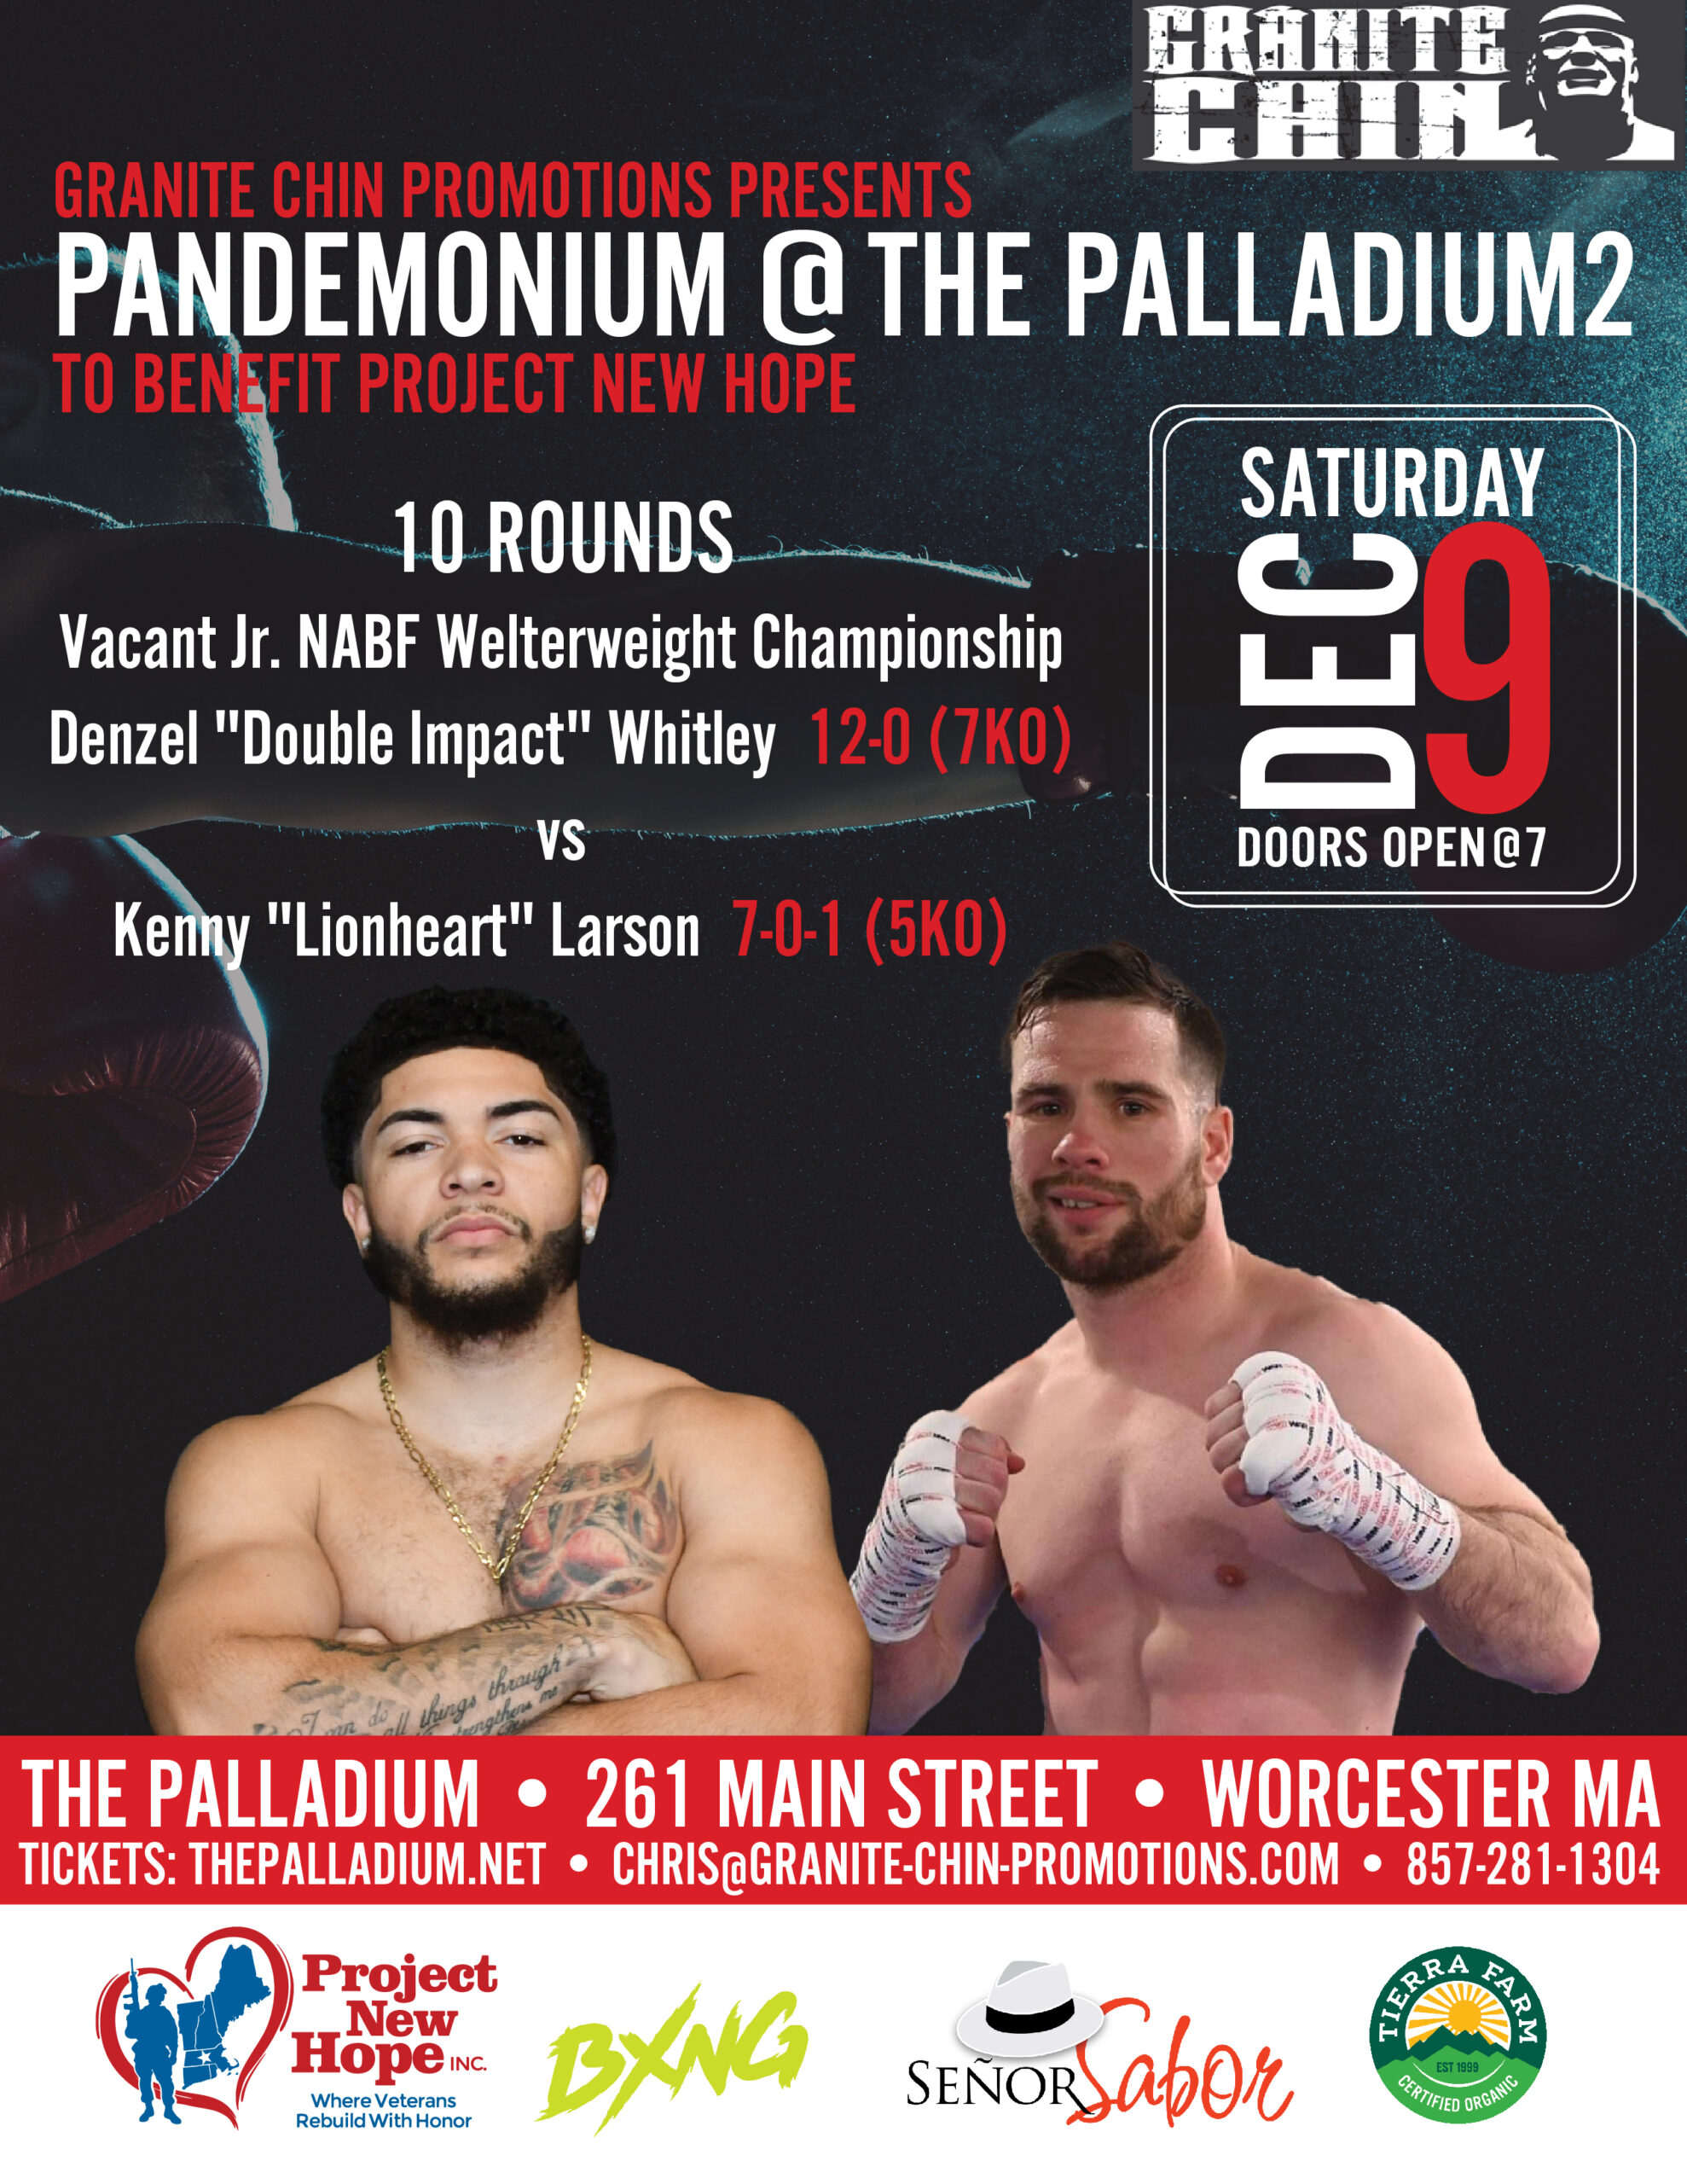 Boxers From Pandemonium At The Palladium 2 Check In With Mike Hsu About This Saturday’s Fights